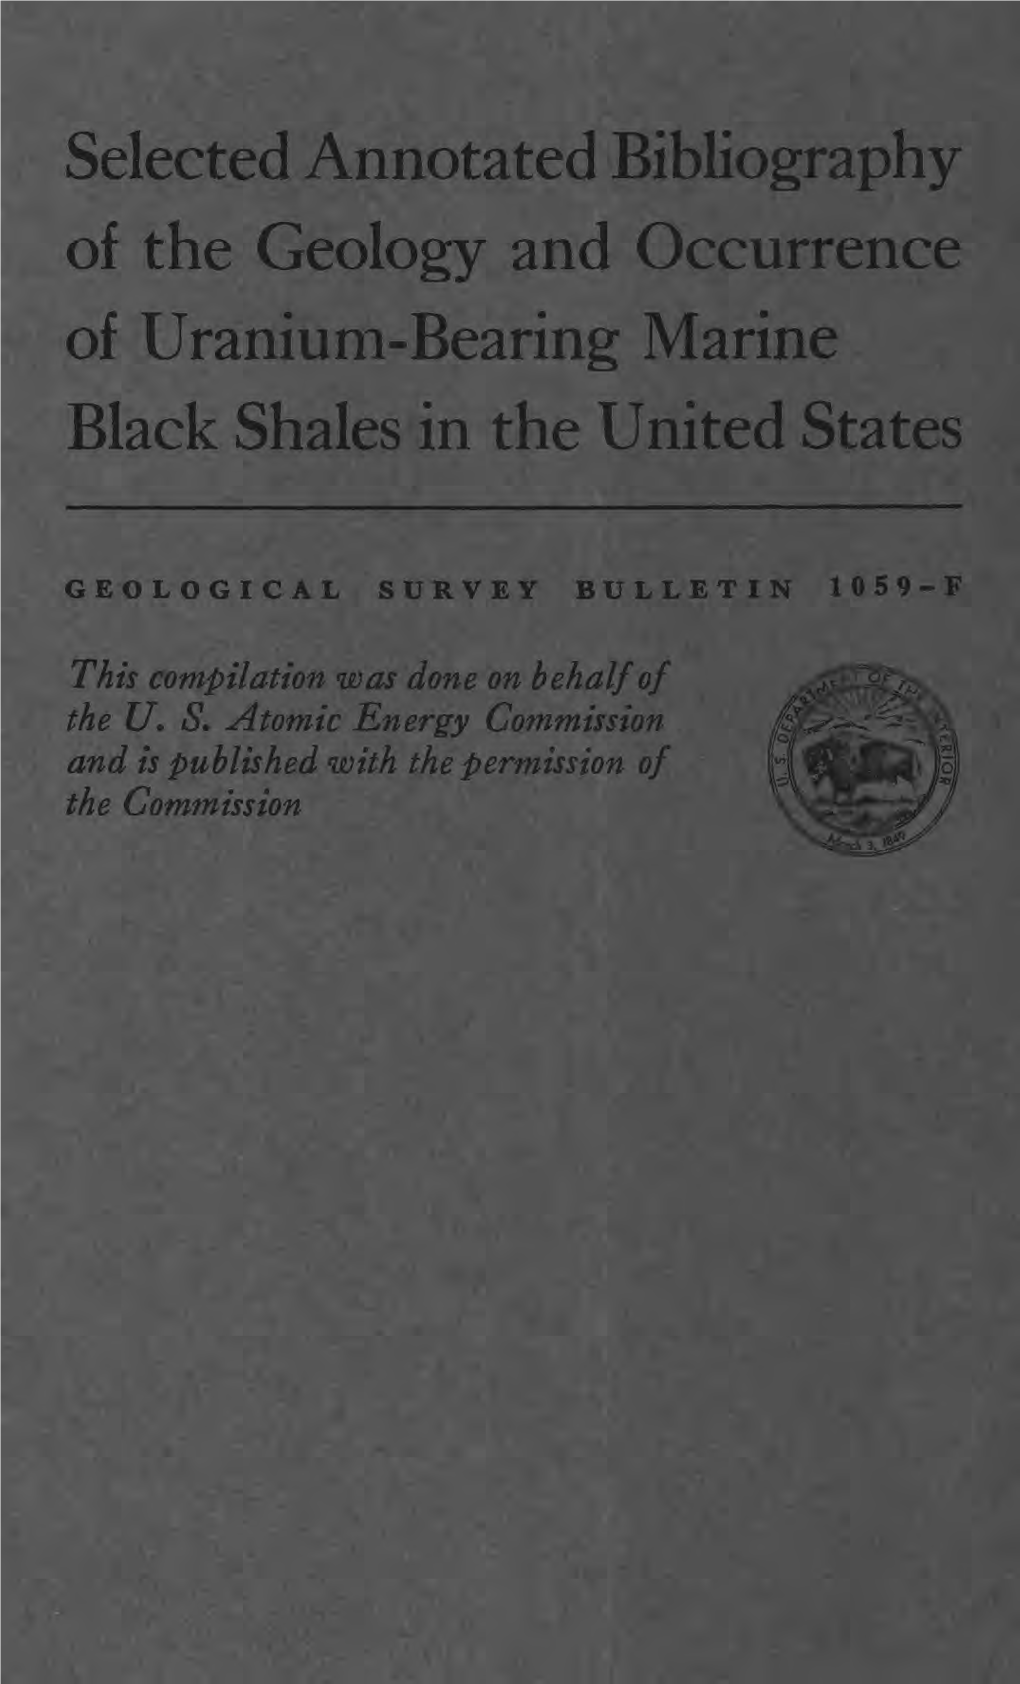 Selected Annotated Bibliography of the Geology and Occurrence of Uranium-Bearing Marine Black Shales in the United States